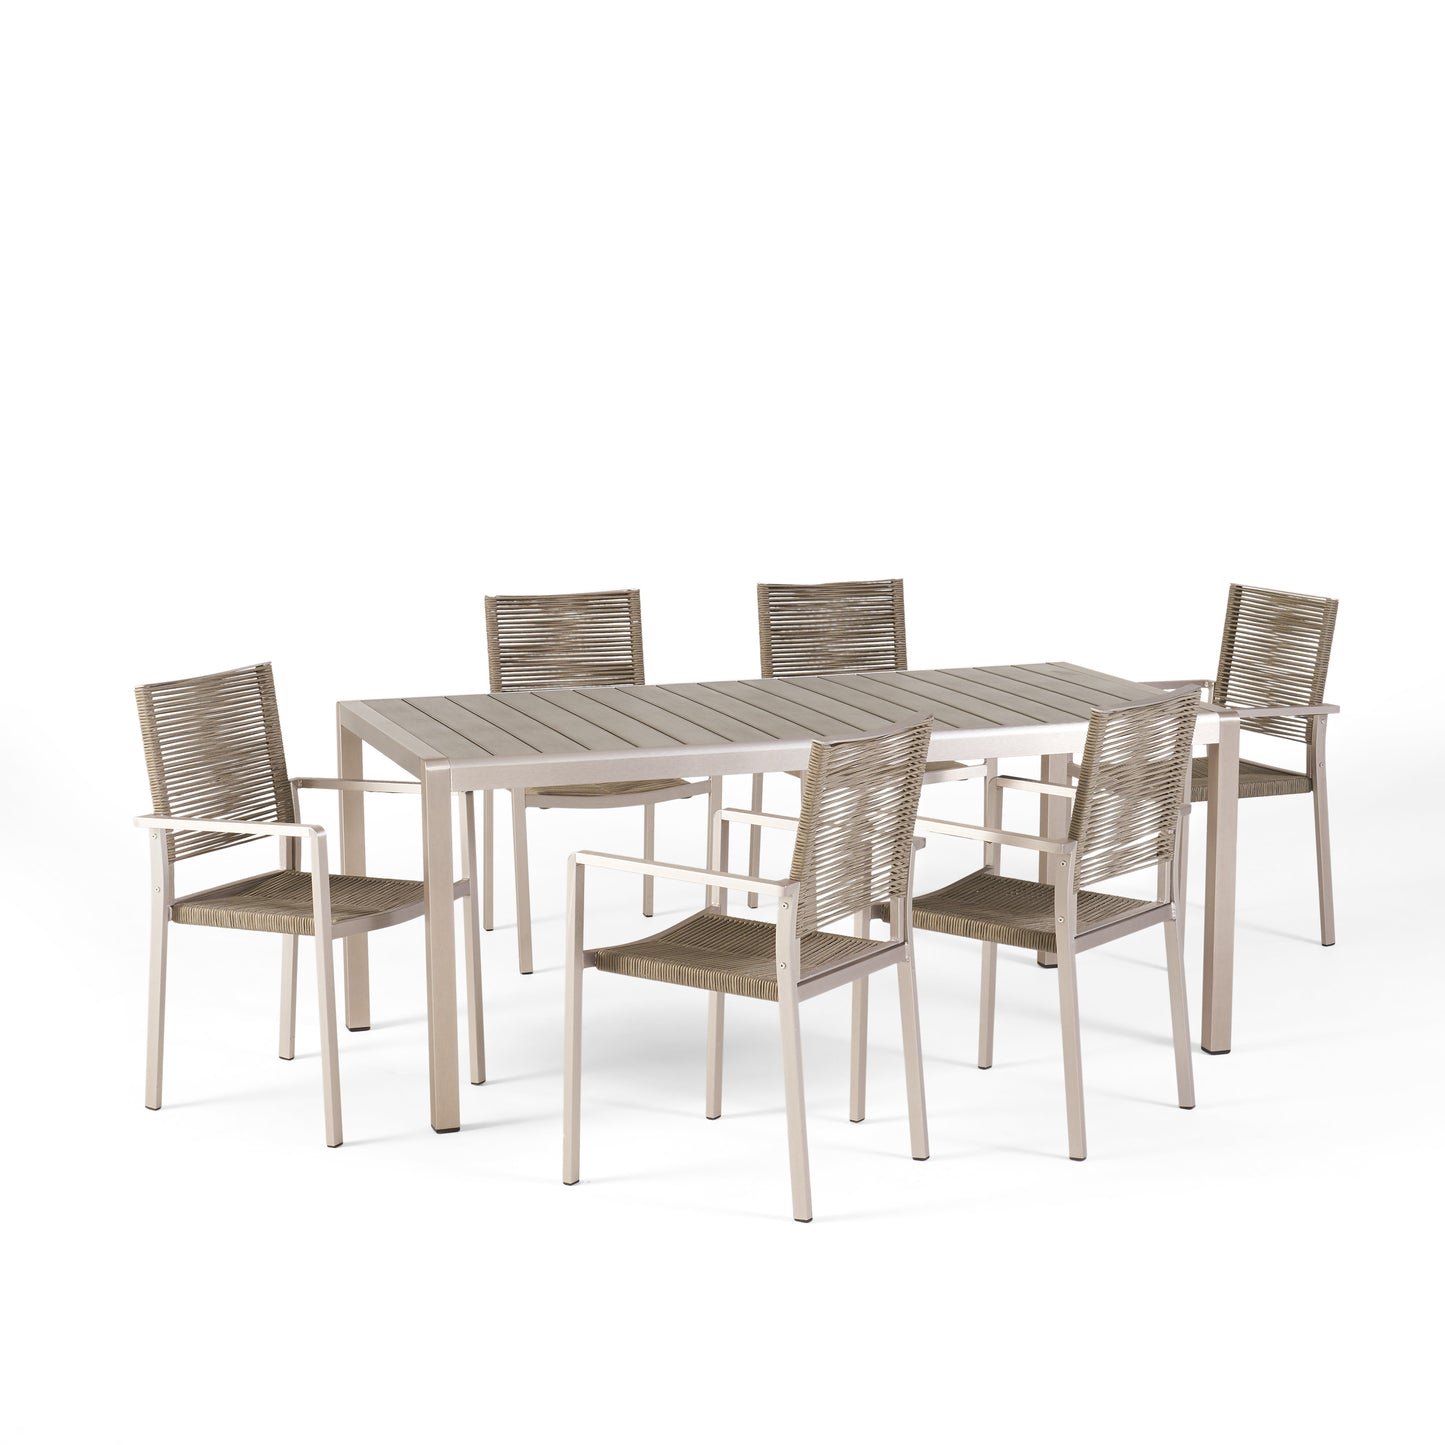 Makyla Outdoor Modern 6 Seater Aluminum Dining Set with Faux Wood Table Top